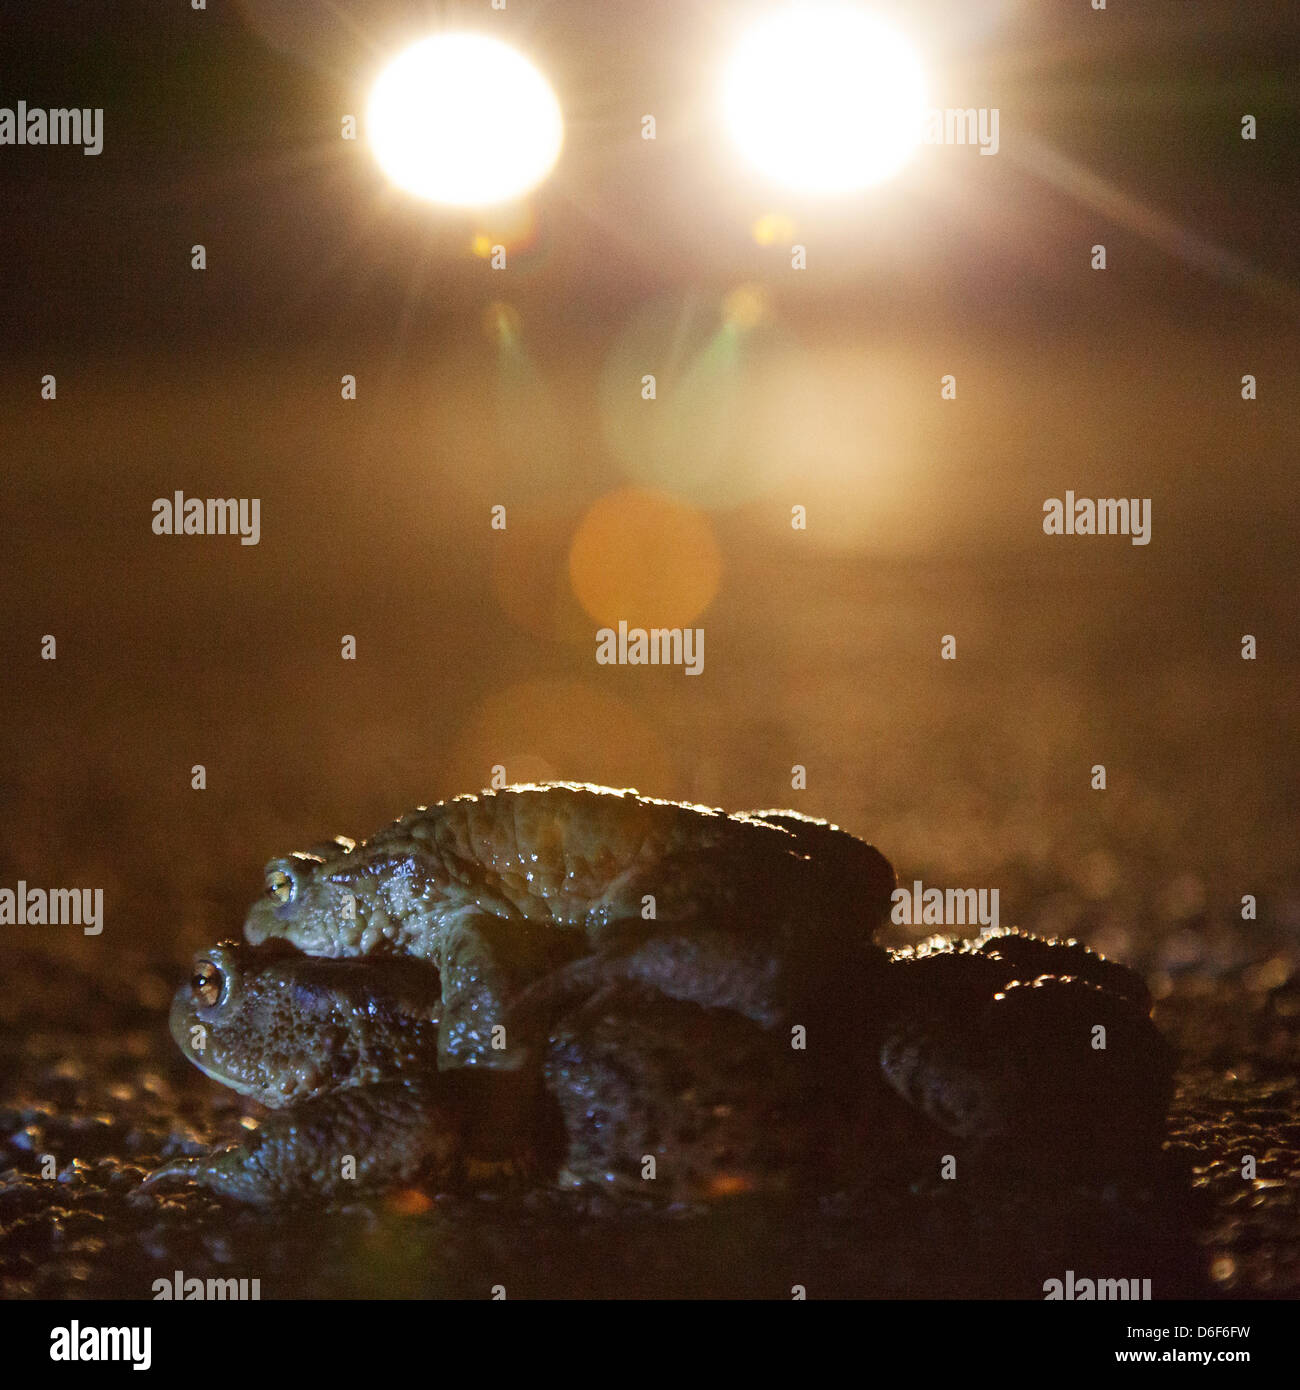 Germany/Saxony/Bluno, toad migratiion, two toas (european toad - bufo bufo) sit on a street at night, 16 April 2013 Stock Photo